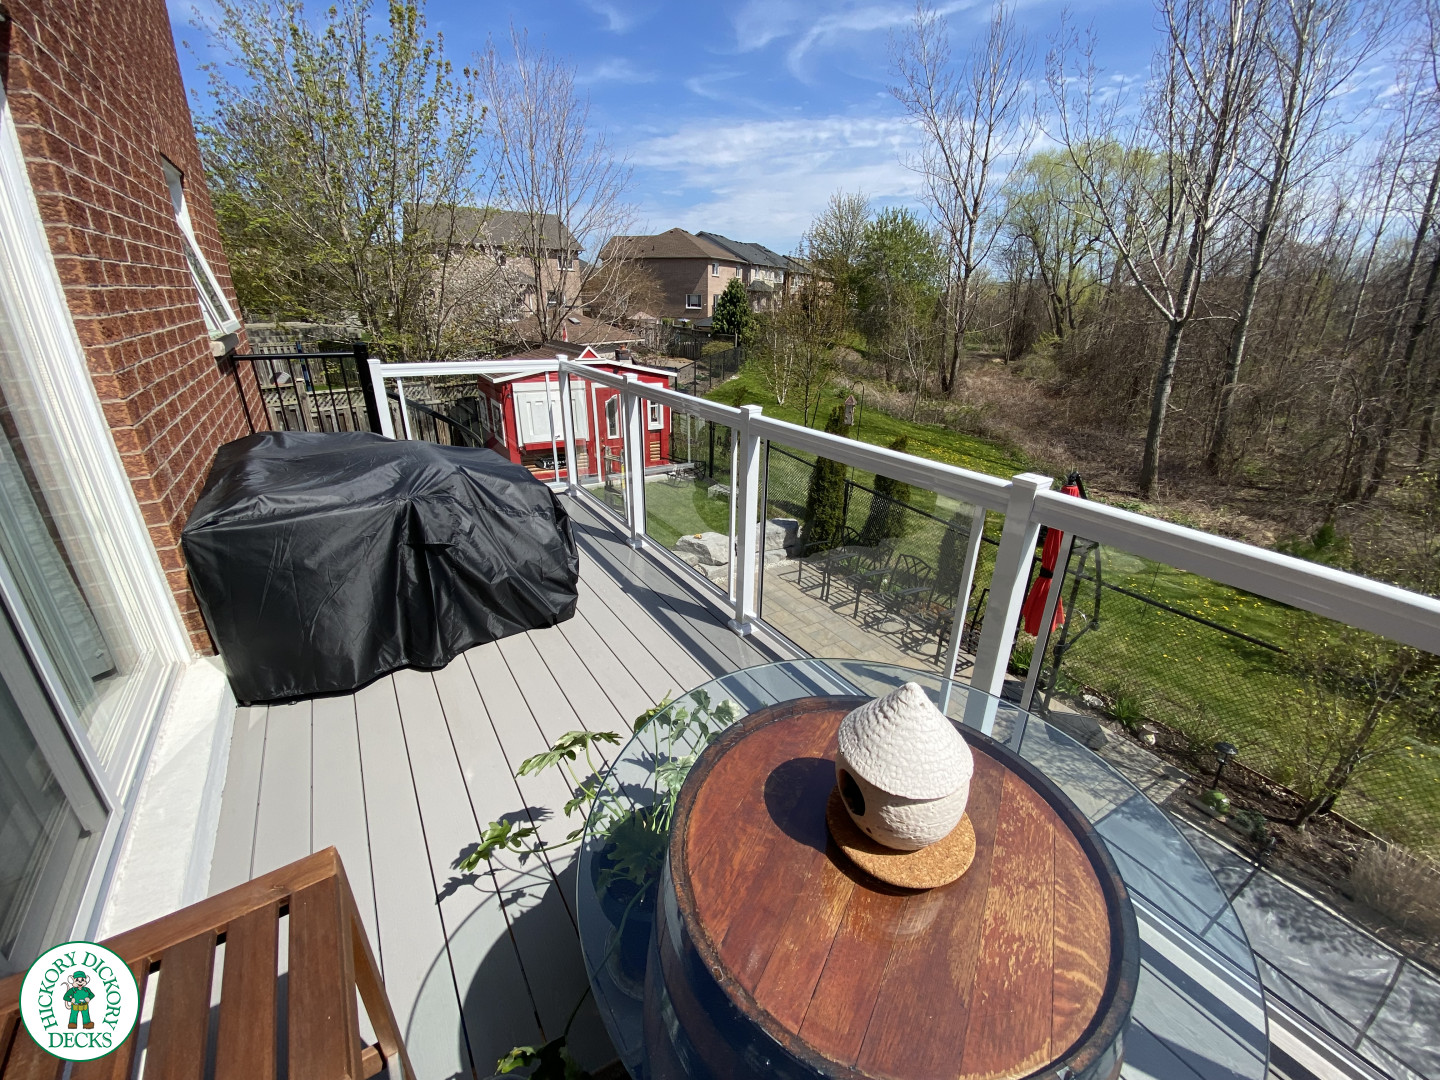 High clubhouse deck with glass railing